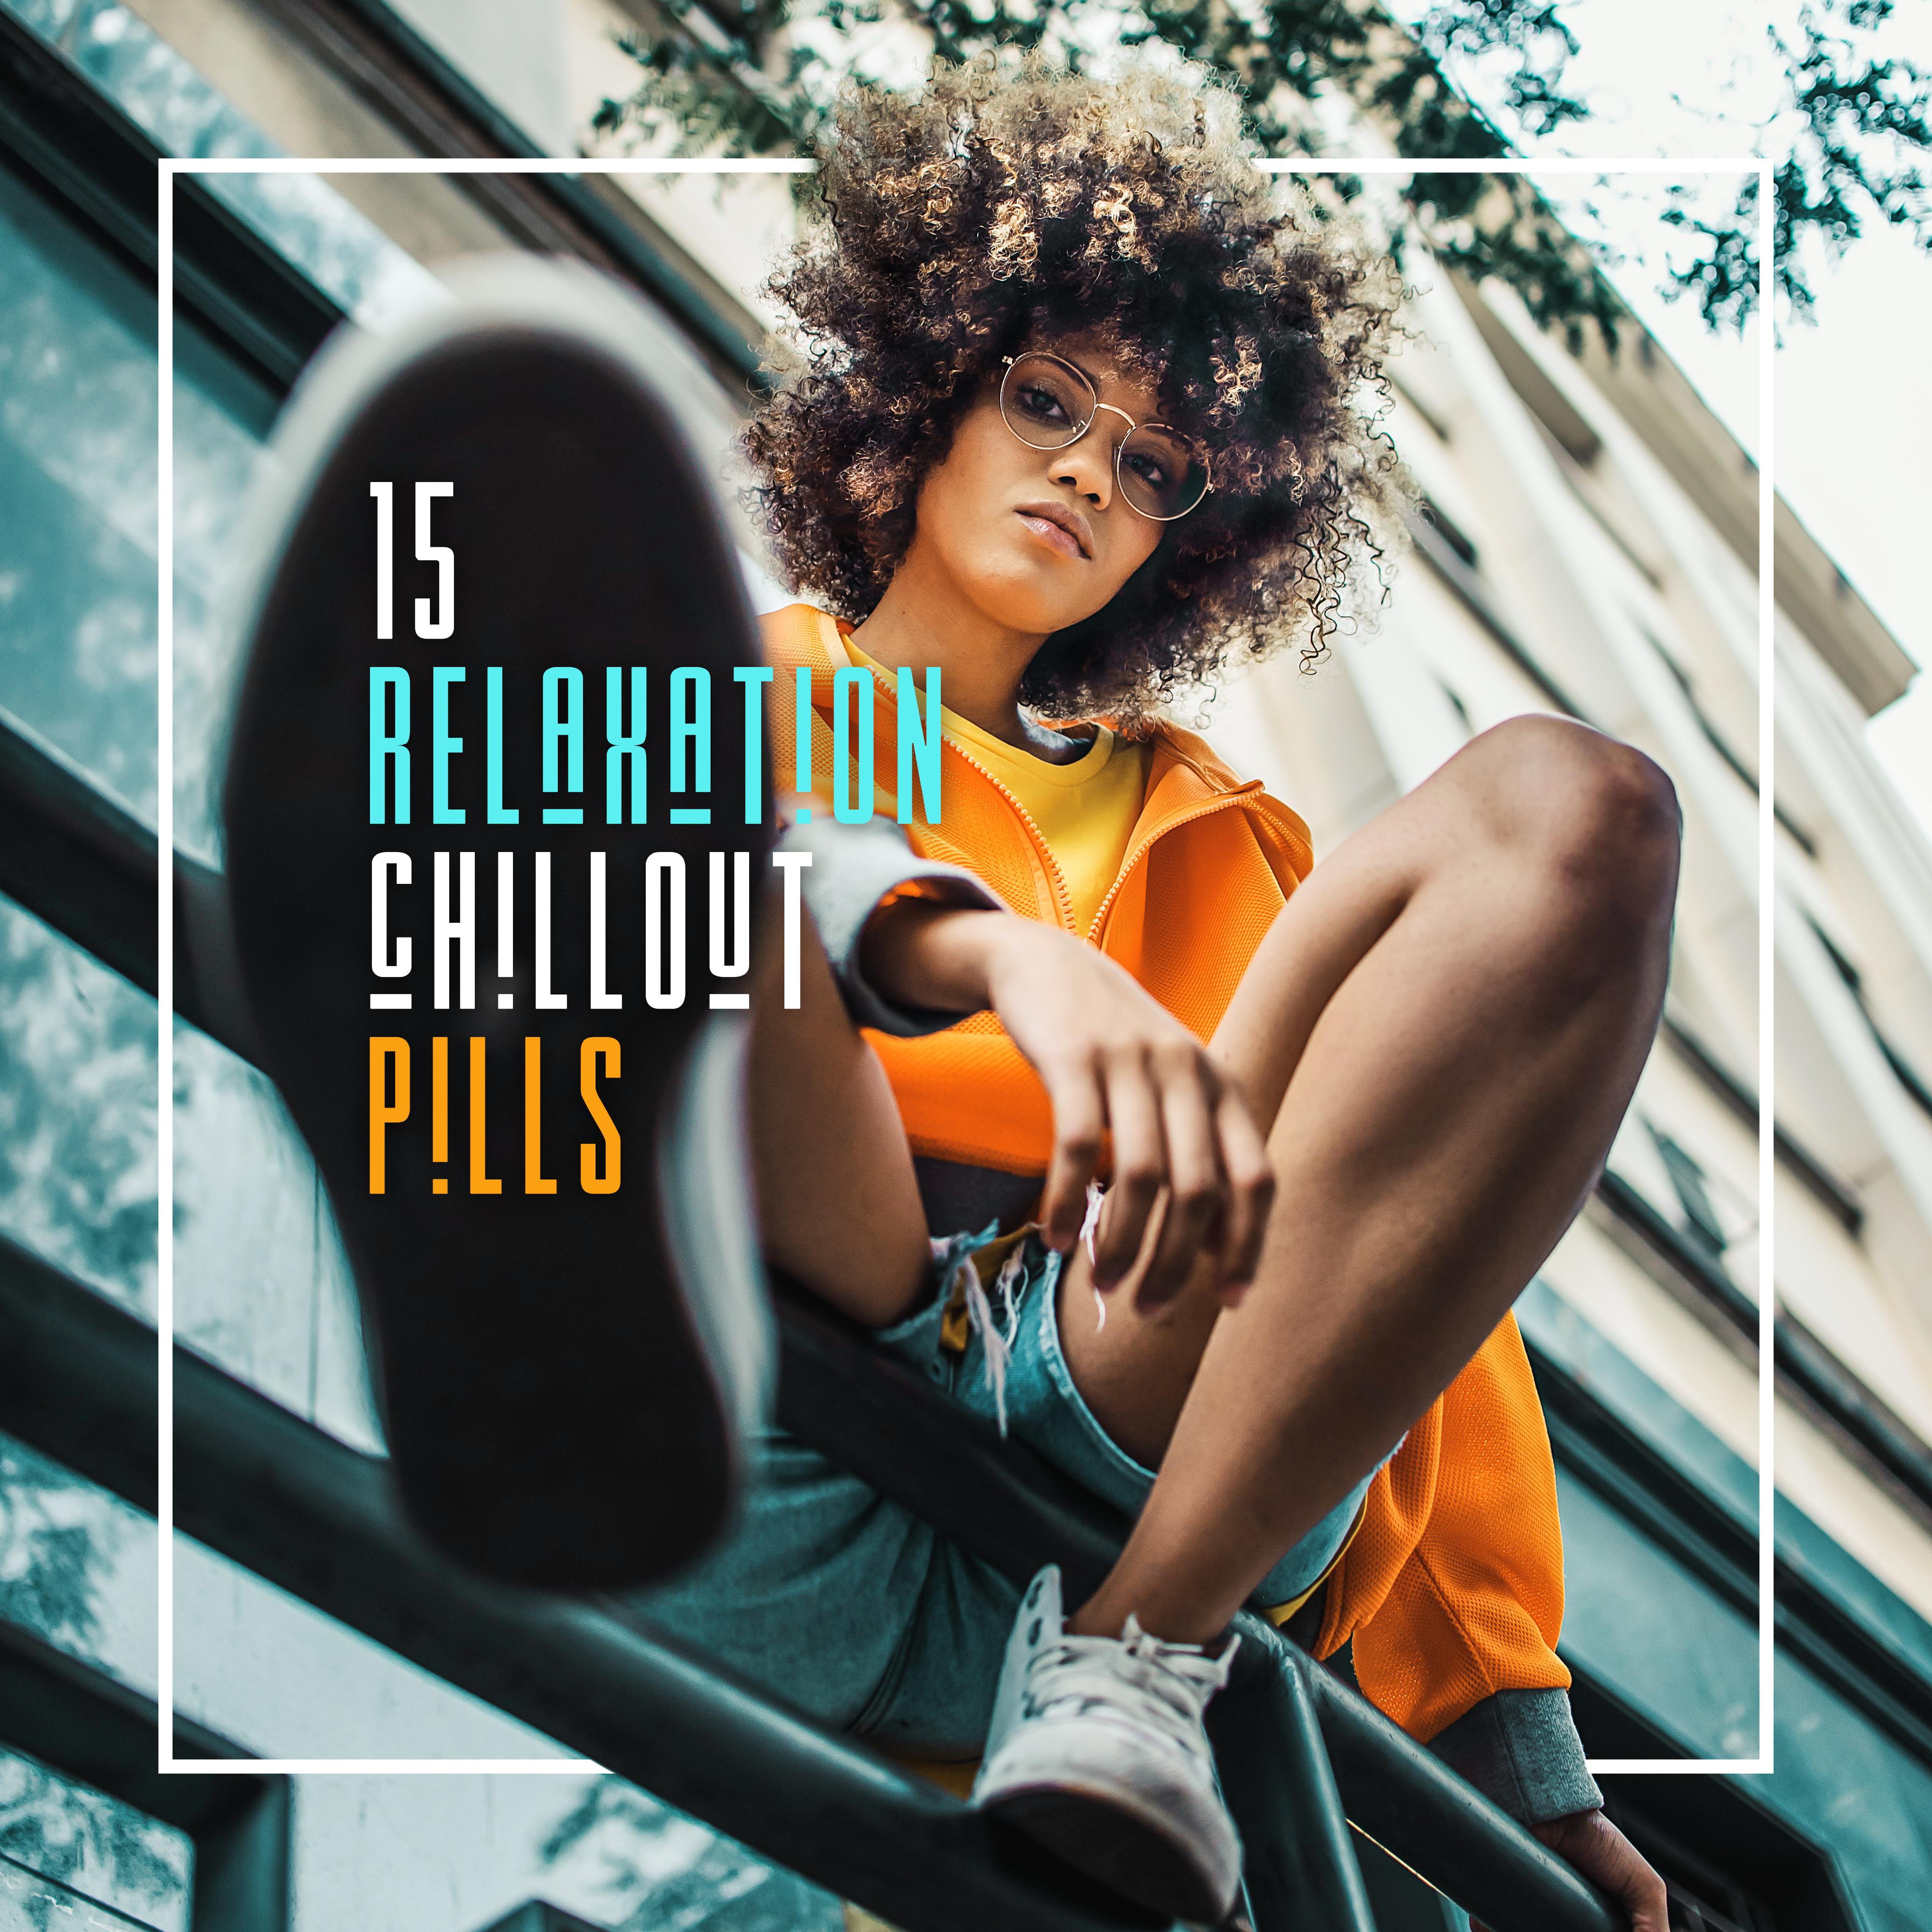 15 Relaxation Chillout Pills: Best 2019 Chill Out Vacation Music, Perfect Beats for Relaxing on the Tropical Beach, Smooth Sunny Vibes